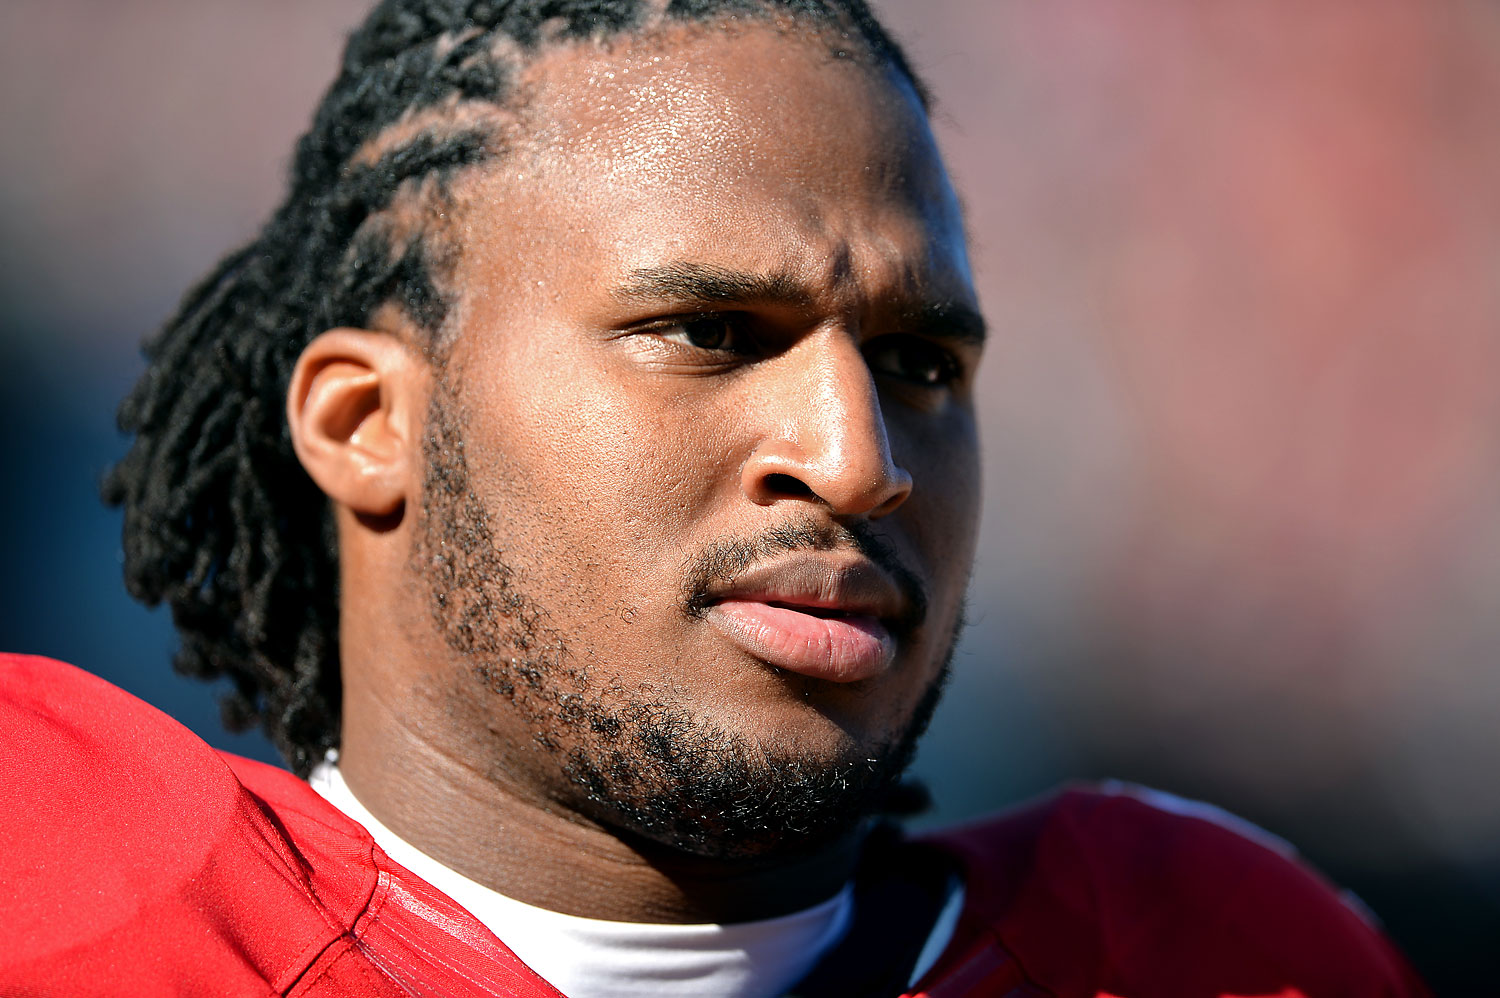 San Francisco 49ers defensive lineman Ray McDonald during an NFL football game against the St. Louis Rams on Dec. 1, 2013, in San Francisco. (Greg Trott—AP)